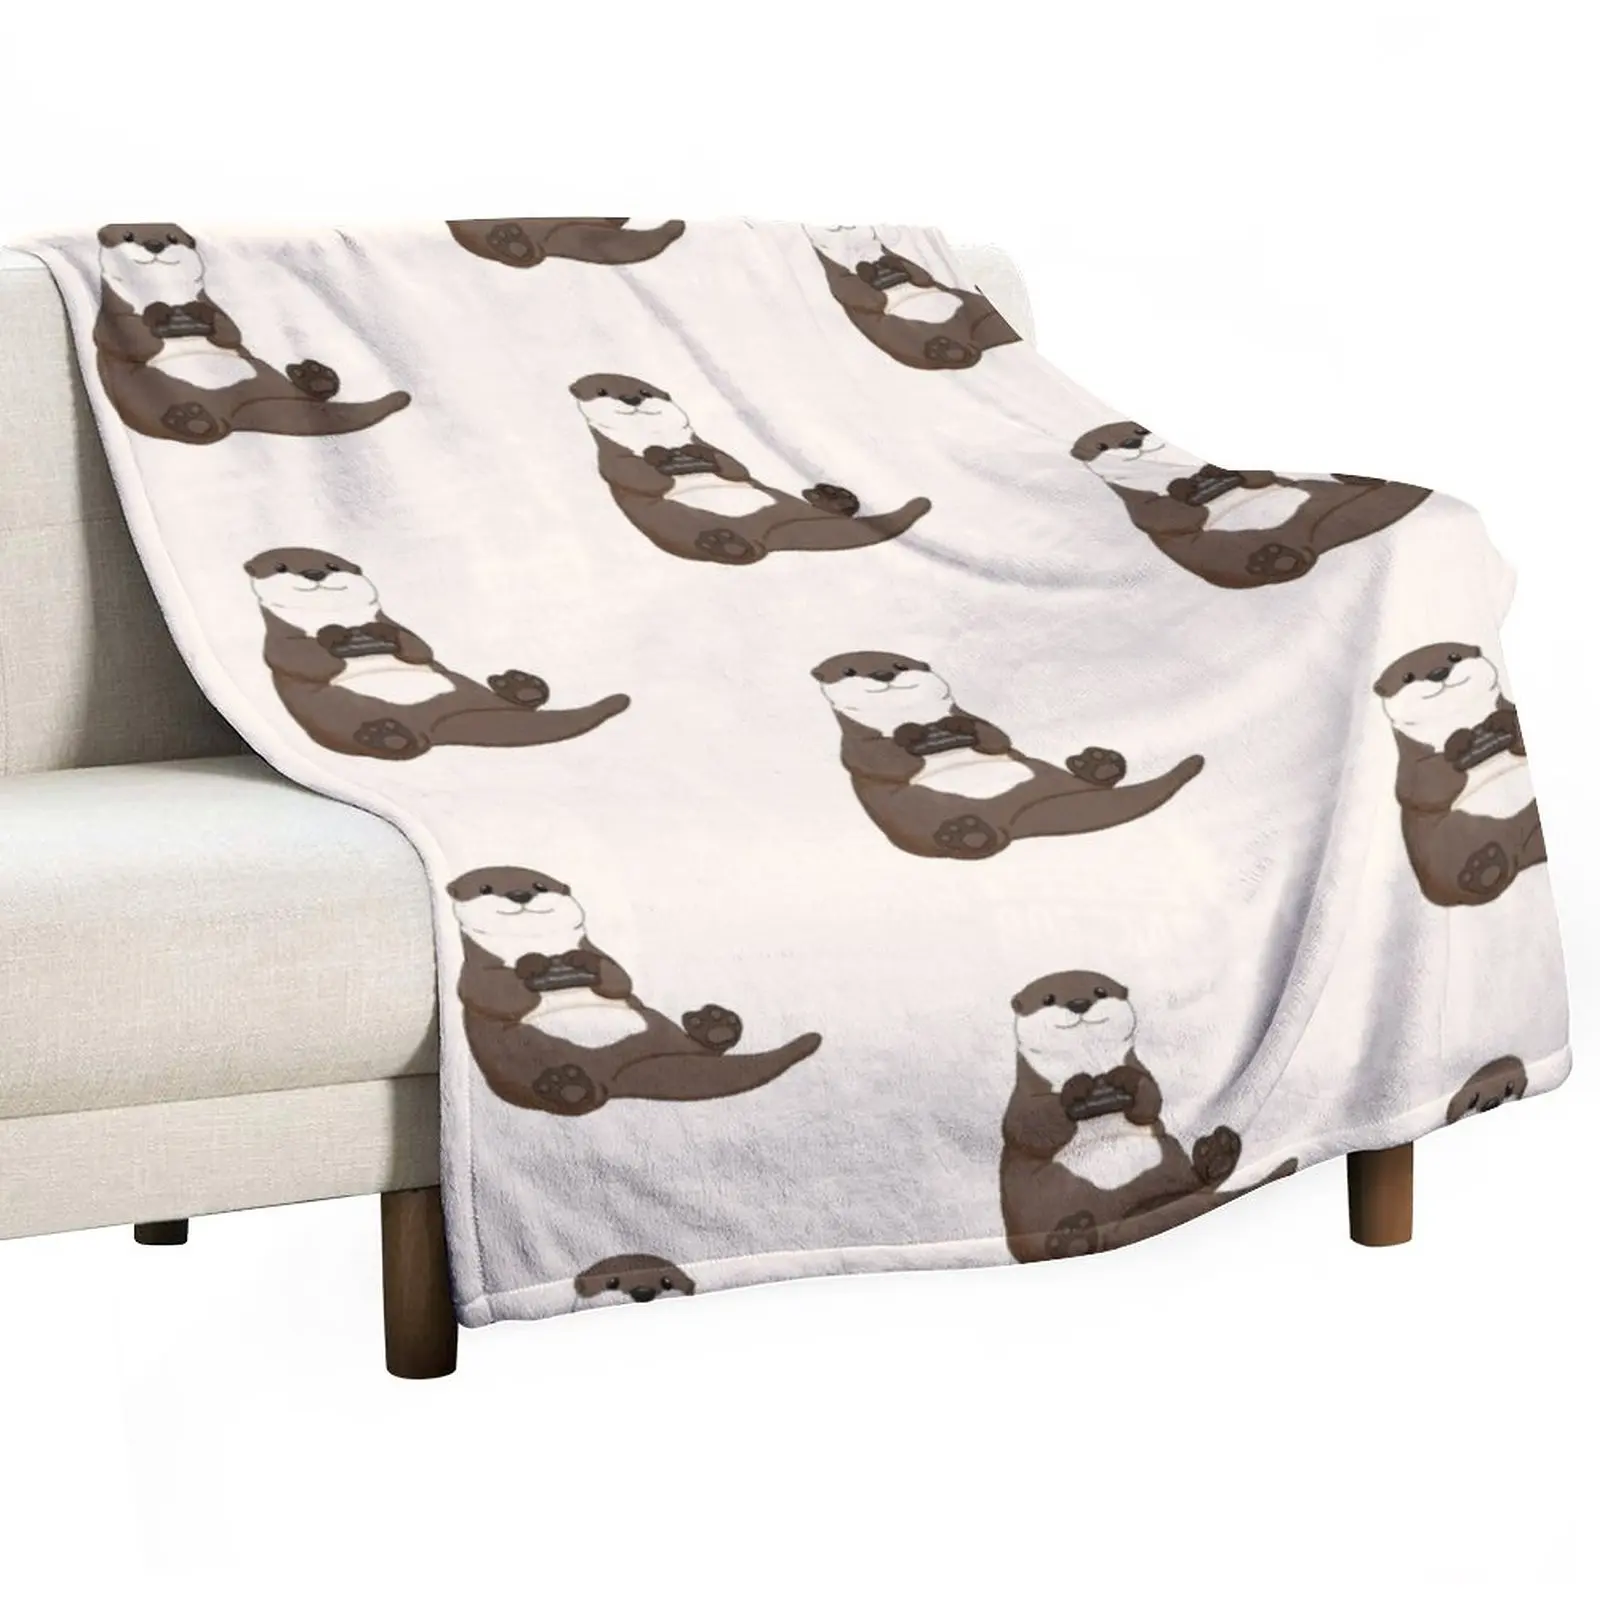 

Cute You're My Favorite Rock Otter Throw Blanket Soft Beds Thins Blankets